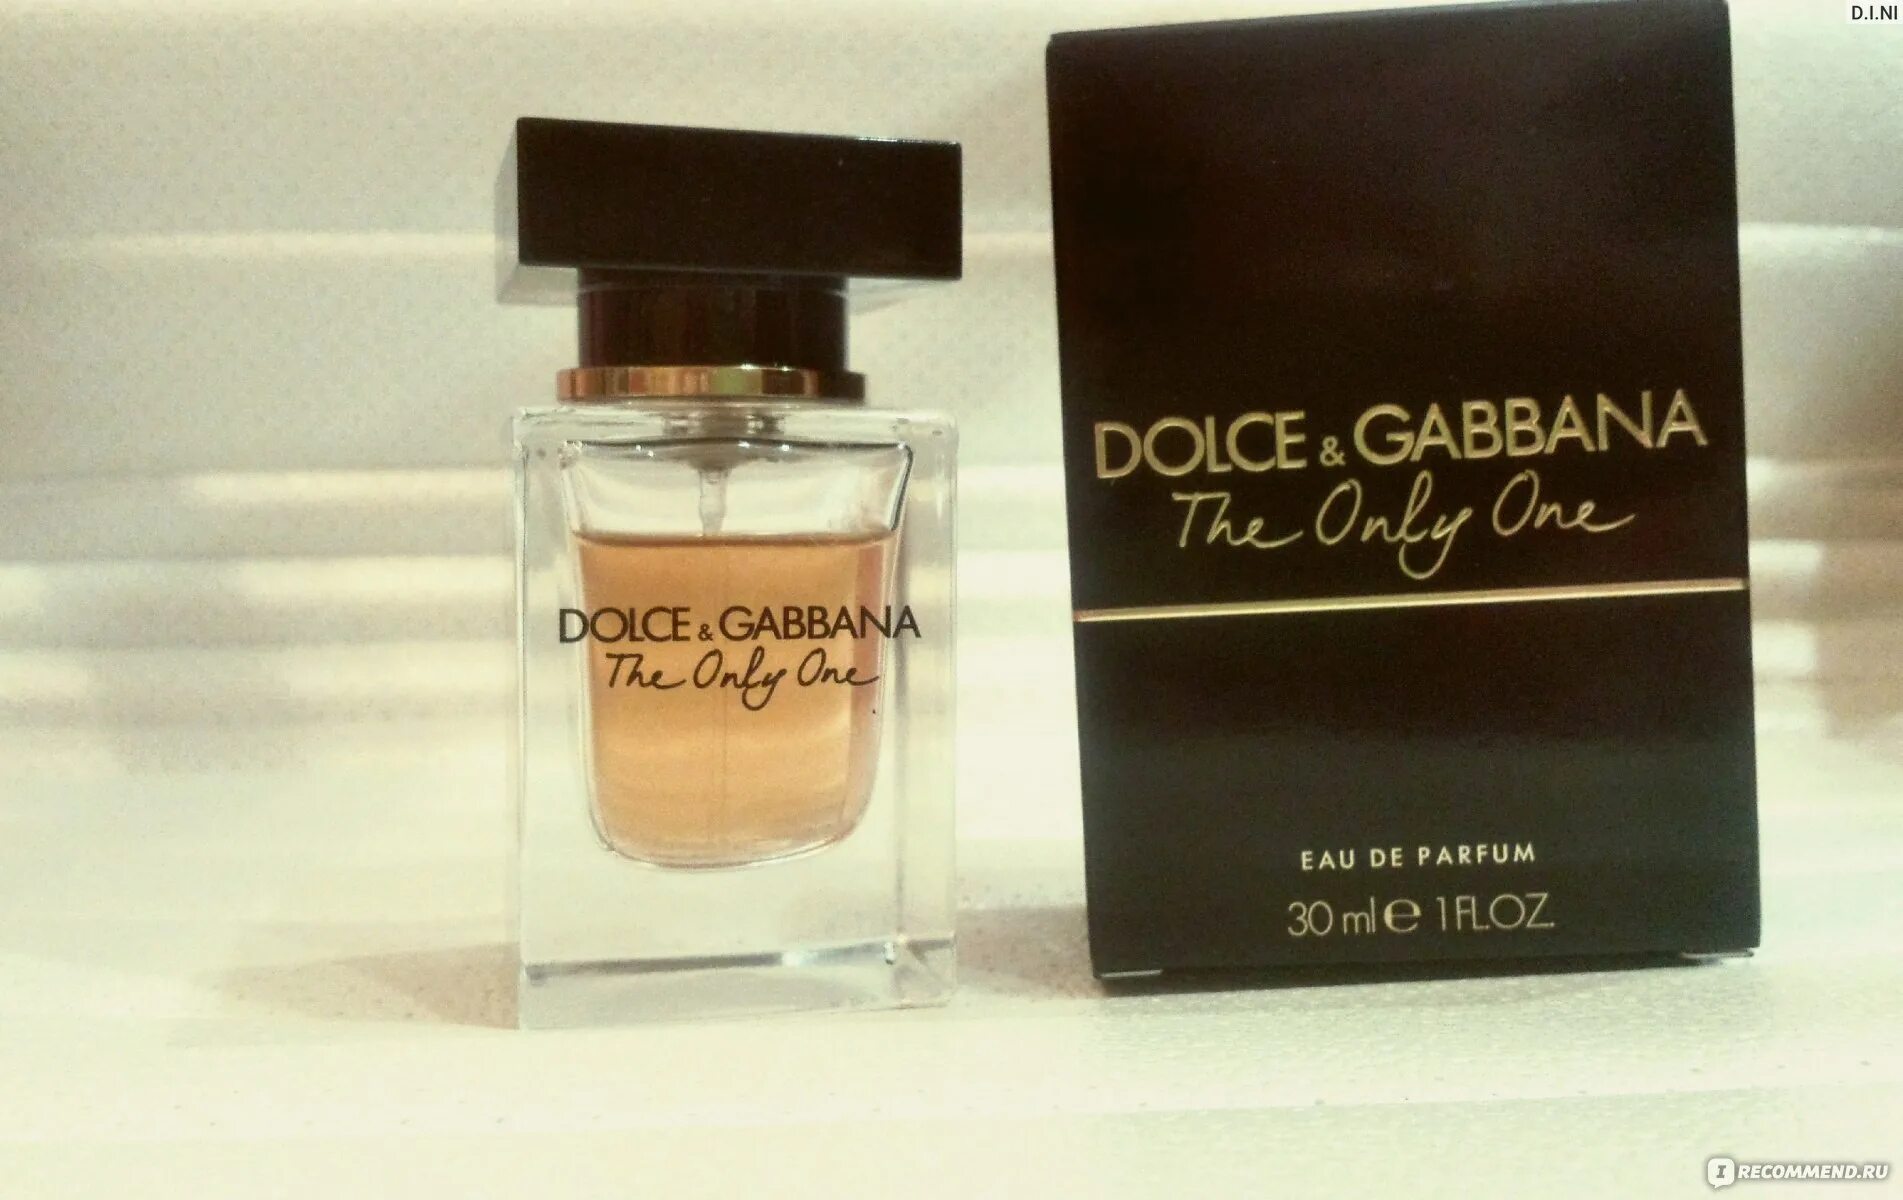 D&G the only one Дольче Габбана. Духи Дольче Габбана the only one. Dolce Gabbana the only one женские 10 мл. Духи Дольче Габбана зе Онли Ван. Духи дольче габбана онли ван